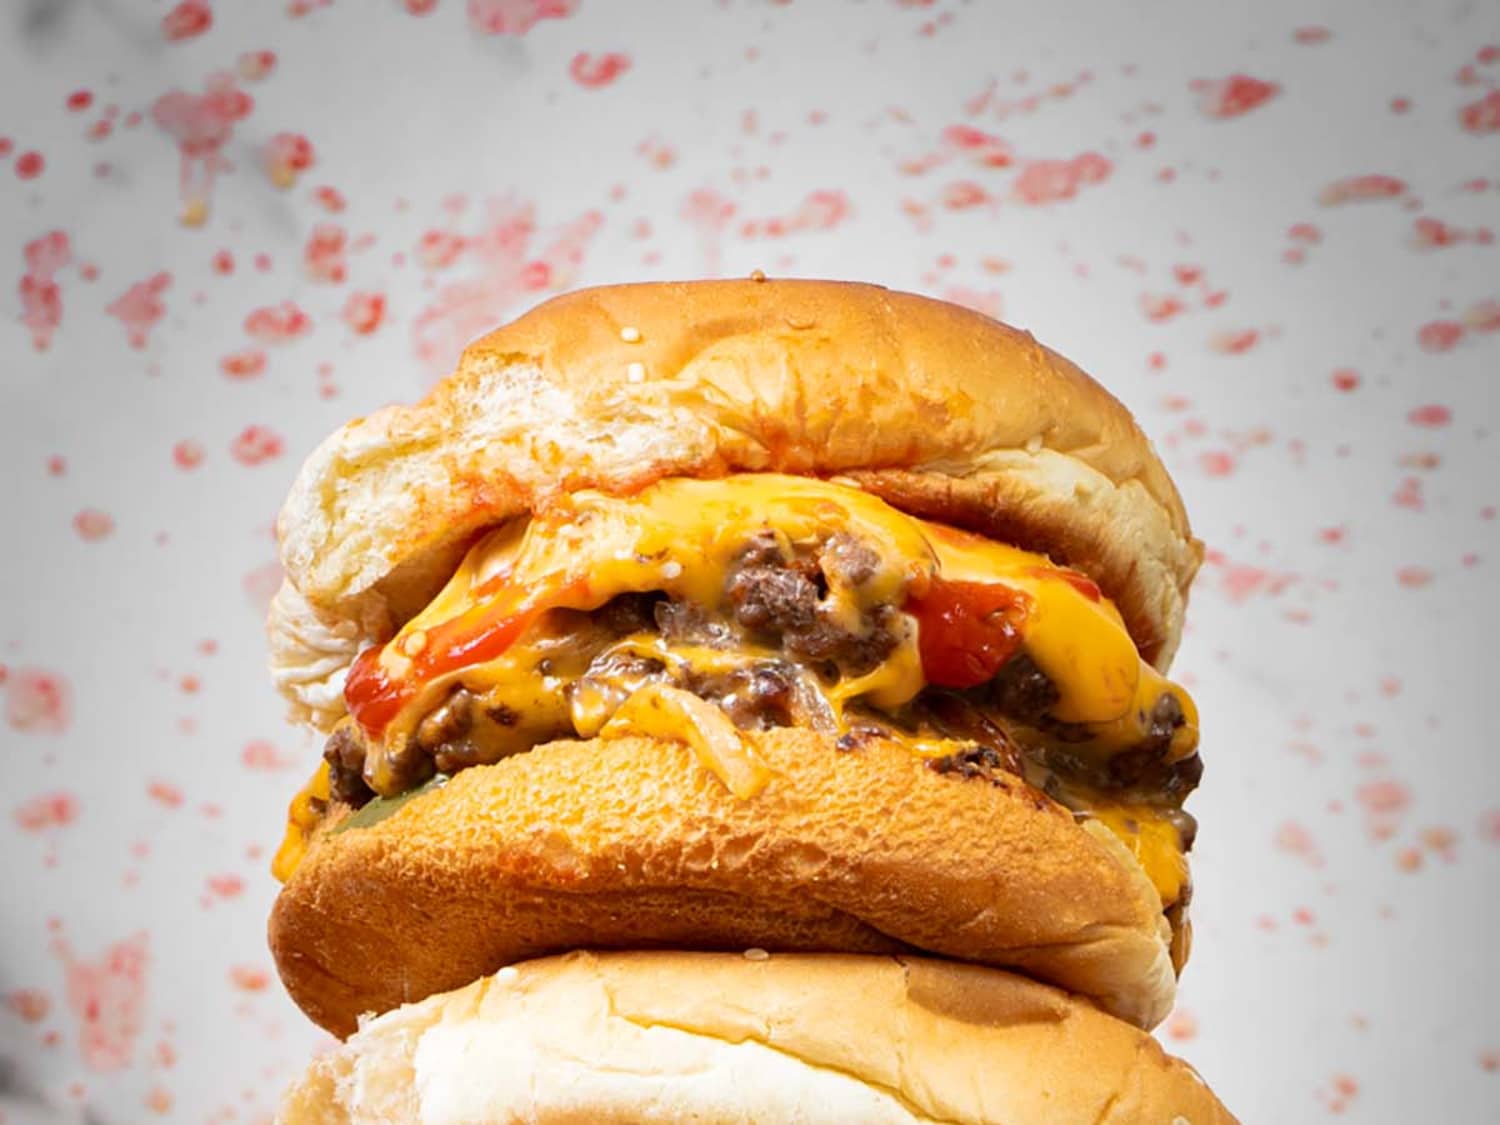 Here's How To Make The Cheeseburger From 'The Menu